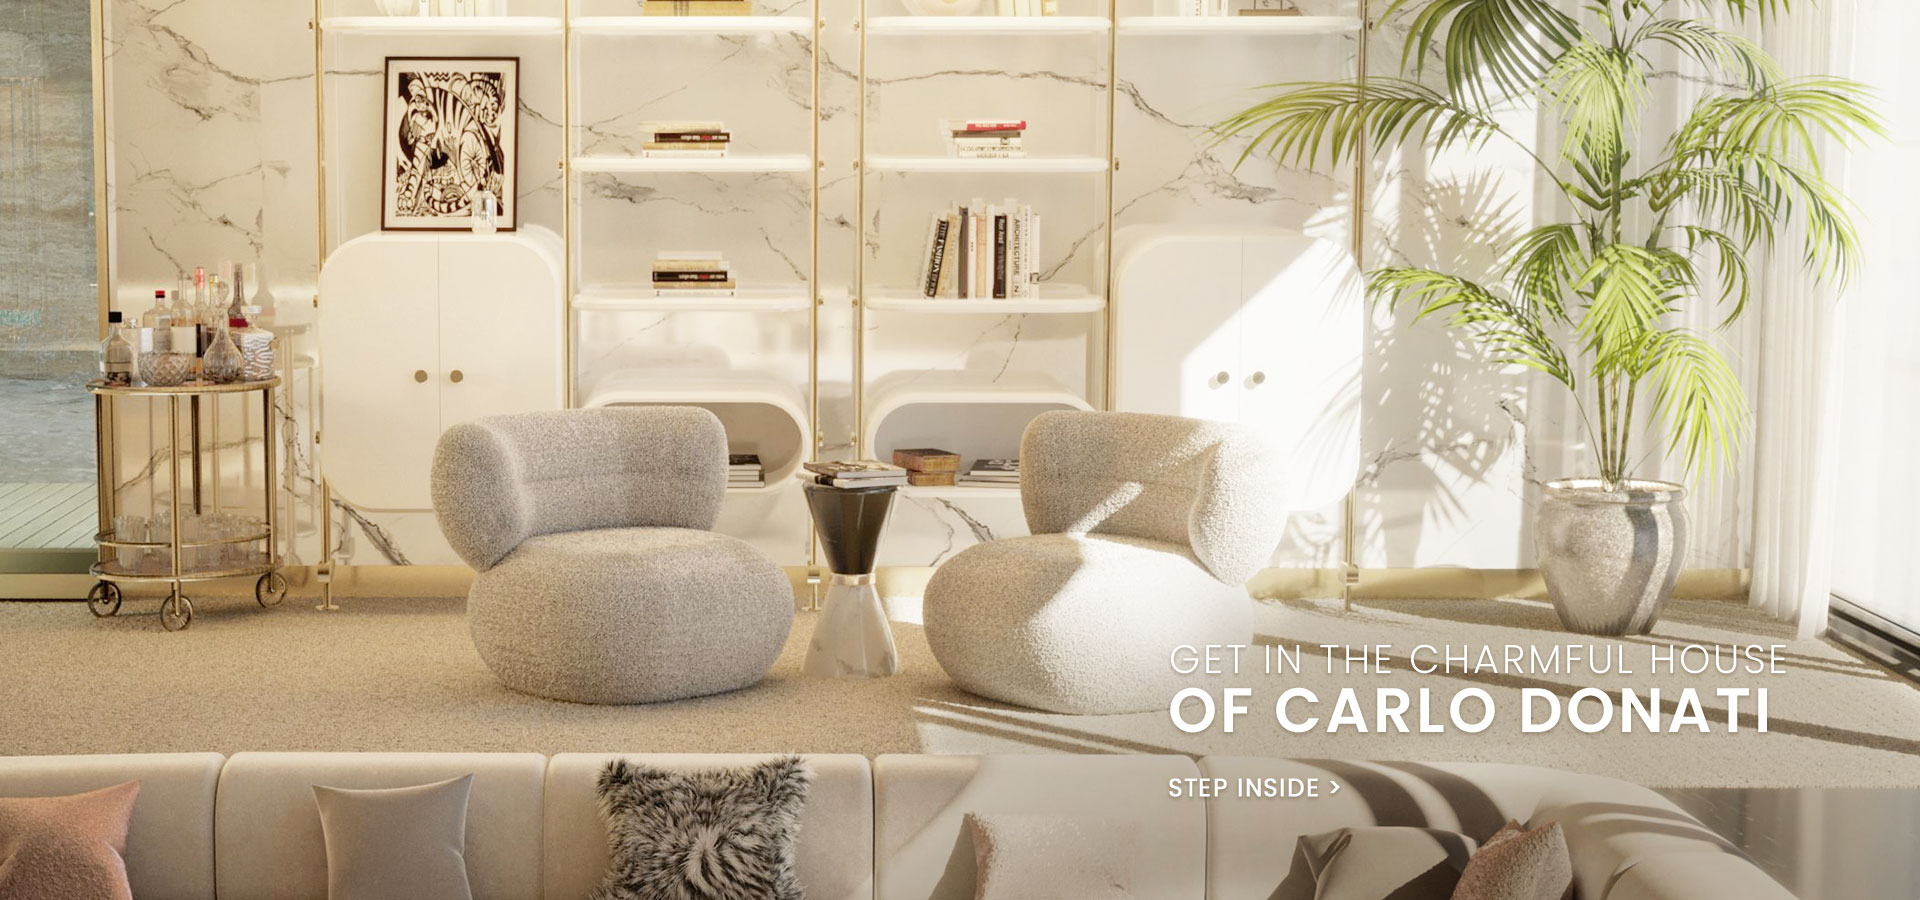 carlodonatihousevt american design trends American Design Trends 2021: How To Pull Off The Hip Industrial Look With The Help Of Karim Rashid saint tropez carlo donati home